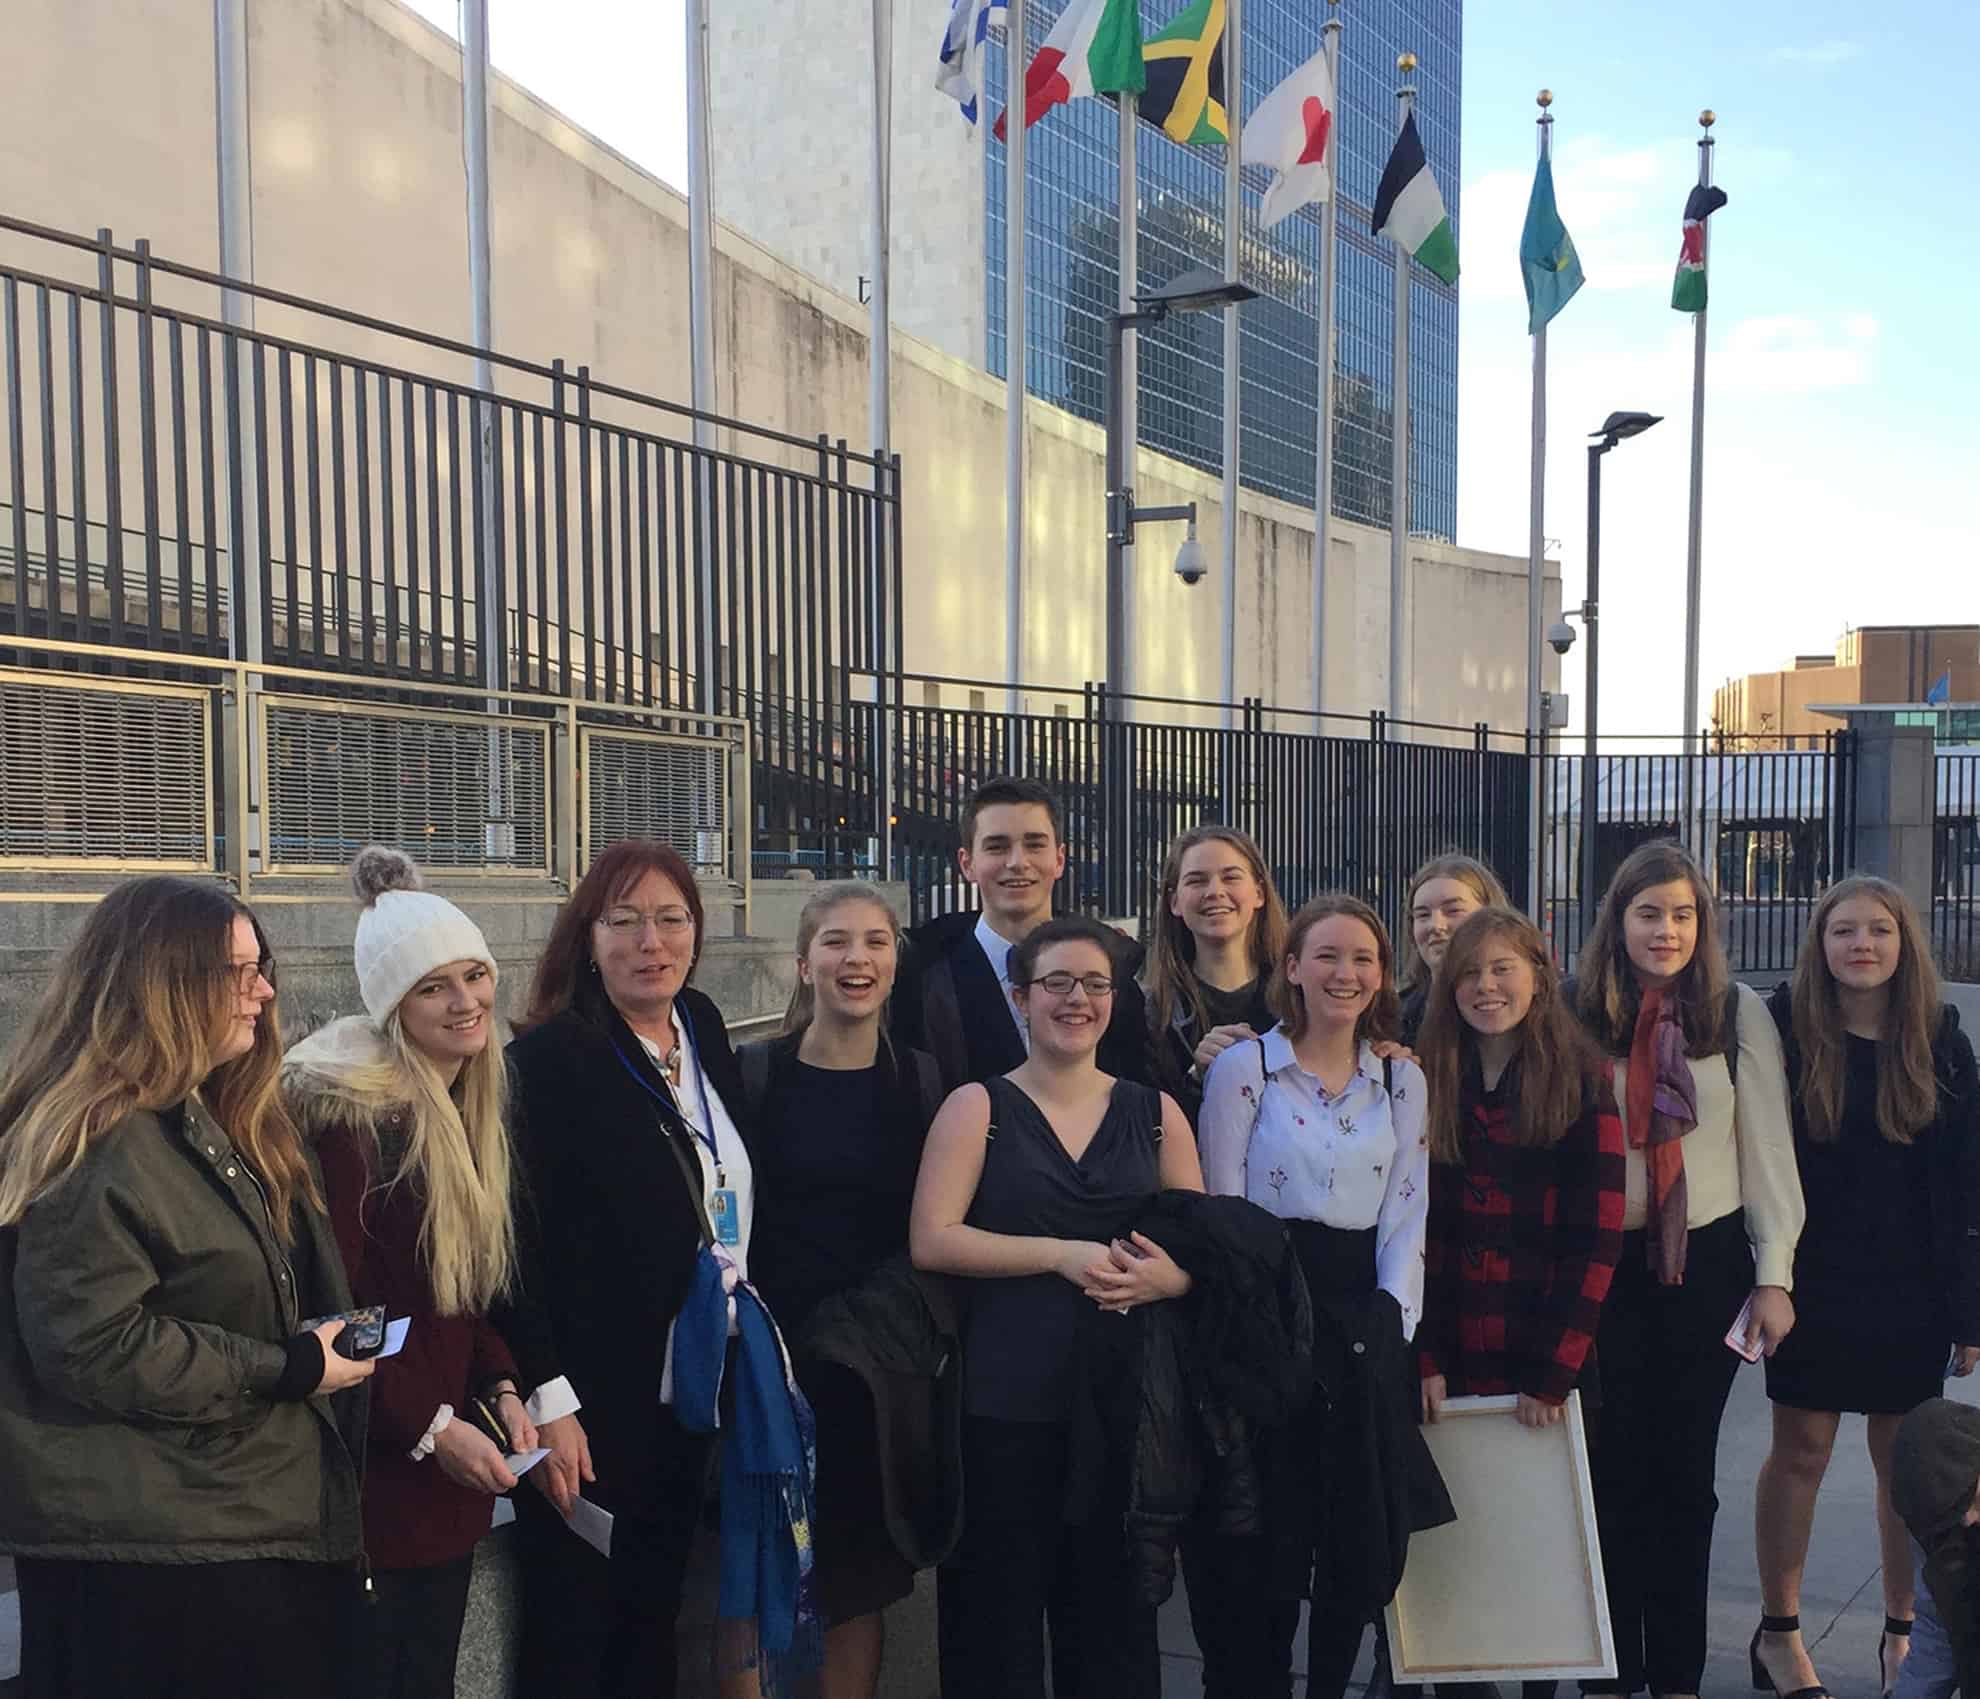 The Trumansburg team awaiting entrance to the UN prior to the final session of the Student Leadership Conference. Shown are (left to right) Arianna Wright, Zoe Golden, Gertrude Noden, Sarah Wertis, Logan Bonn, Georgia Mechalke, Jadyn Wright, Lilian Oxley, Margaret McCurdy, Virginia Clifford, Elizabeth Gardner, and Clair Williamson.